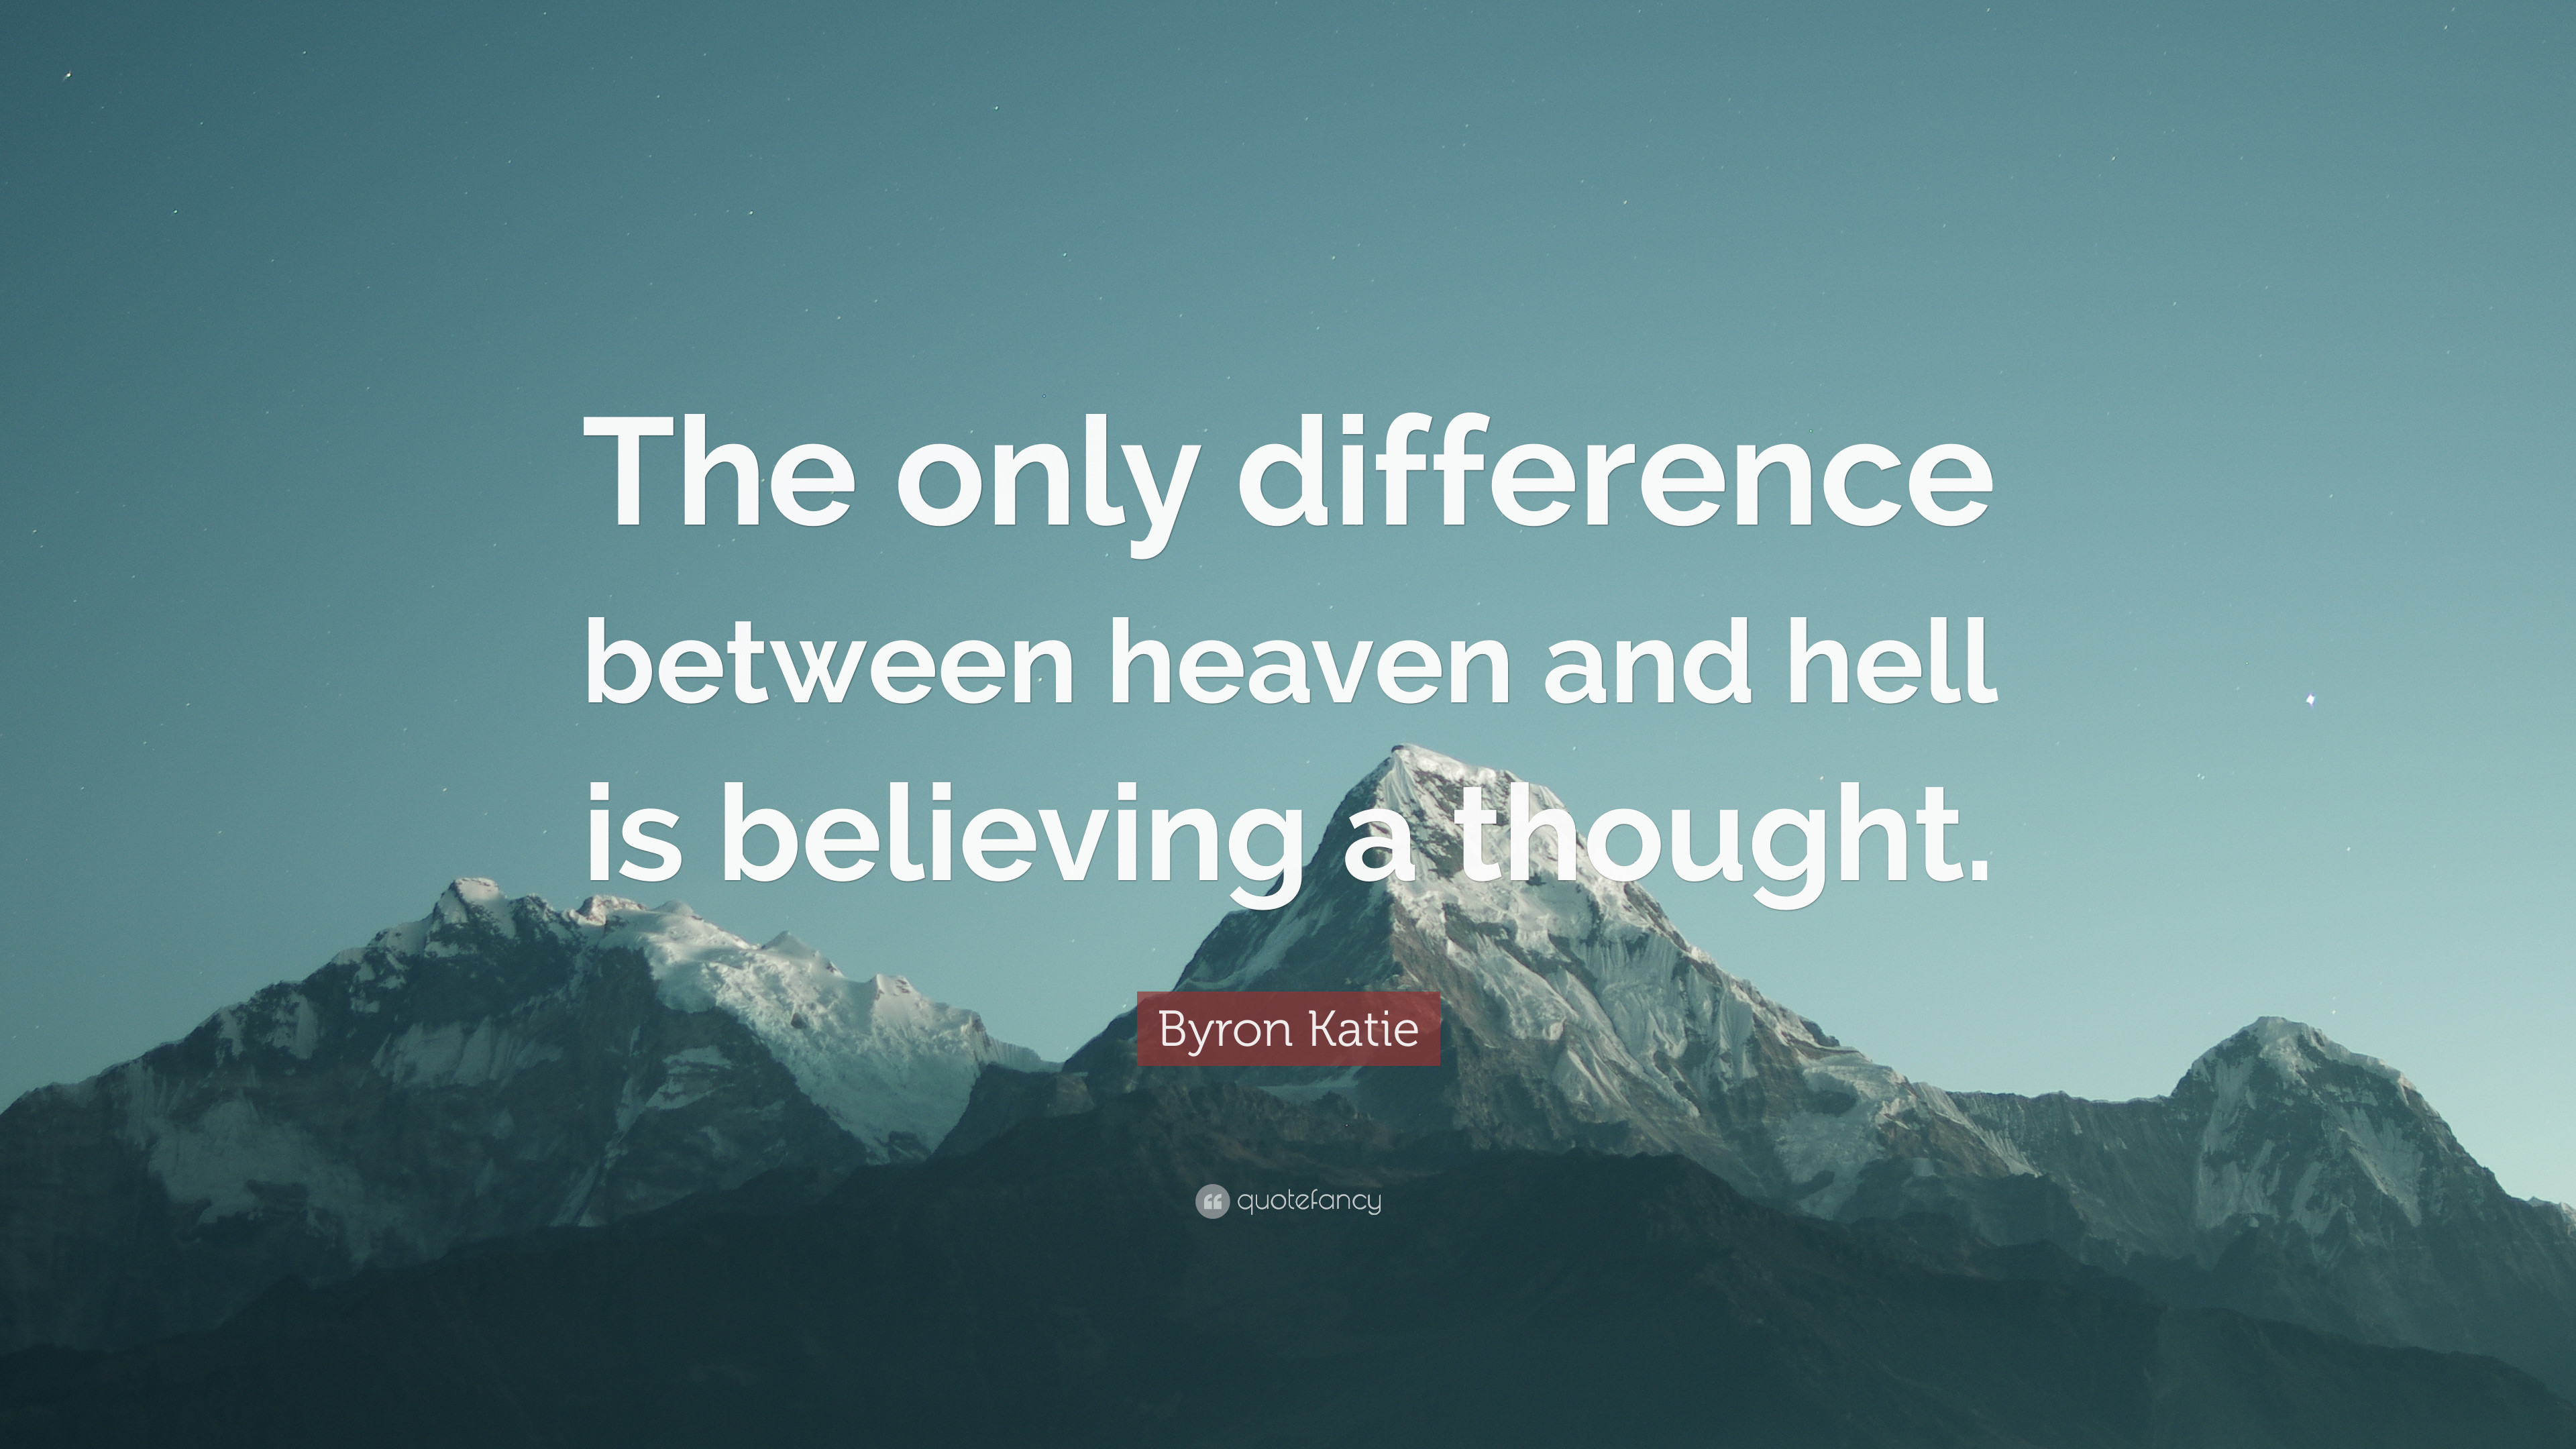 3840x2160 Byron Katie Quote: “The only difference between heaven and hell is  believing a thought